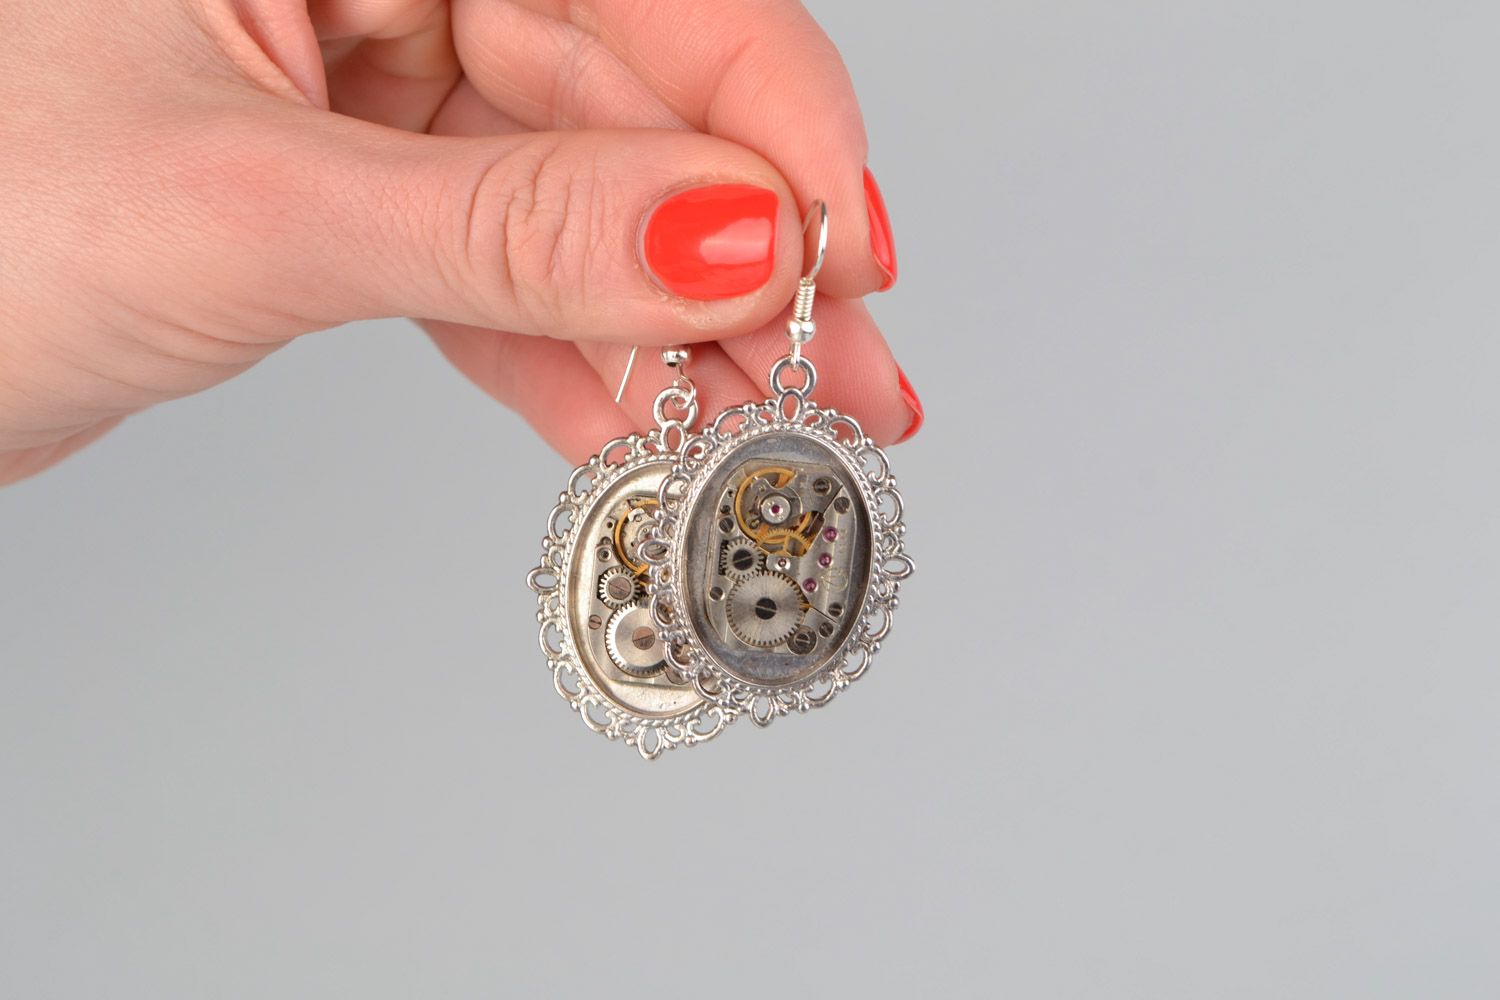 Handmade designer steampunk earrings with lace metal basis and clock mechanism photo 2